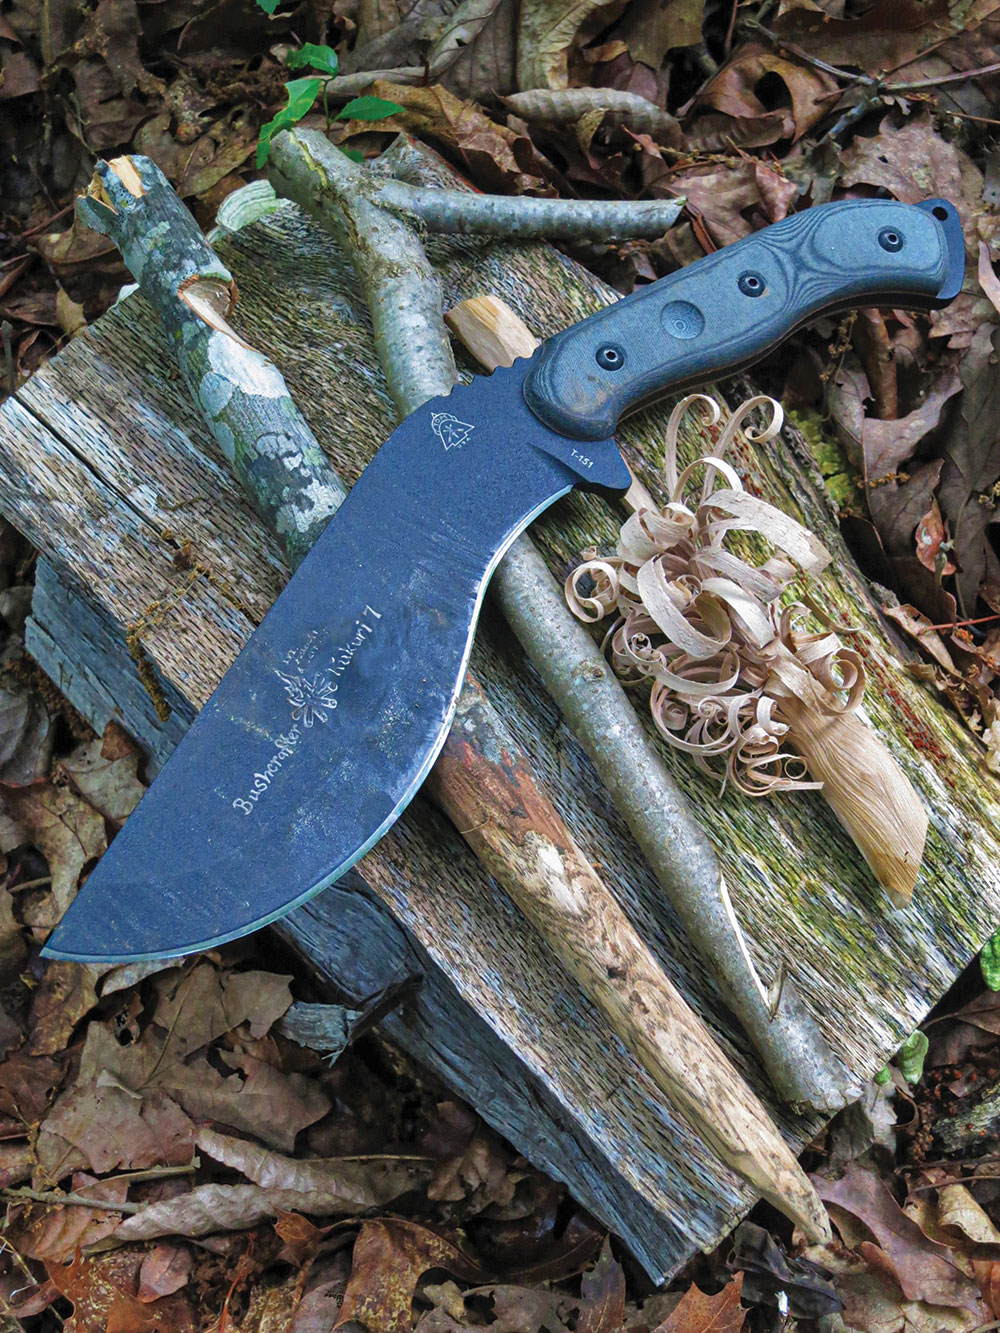 The author used the Bushcrafter Kukuri for many facets of bushcraft.